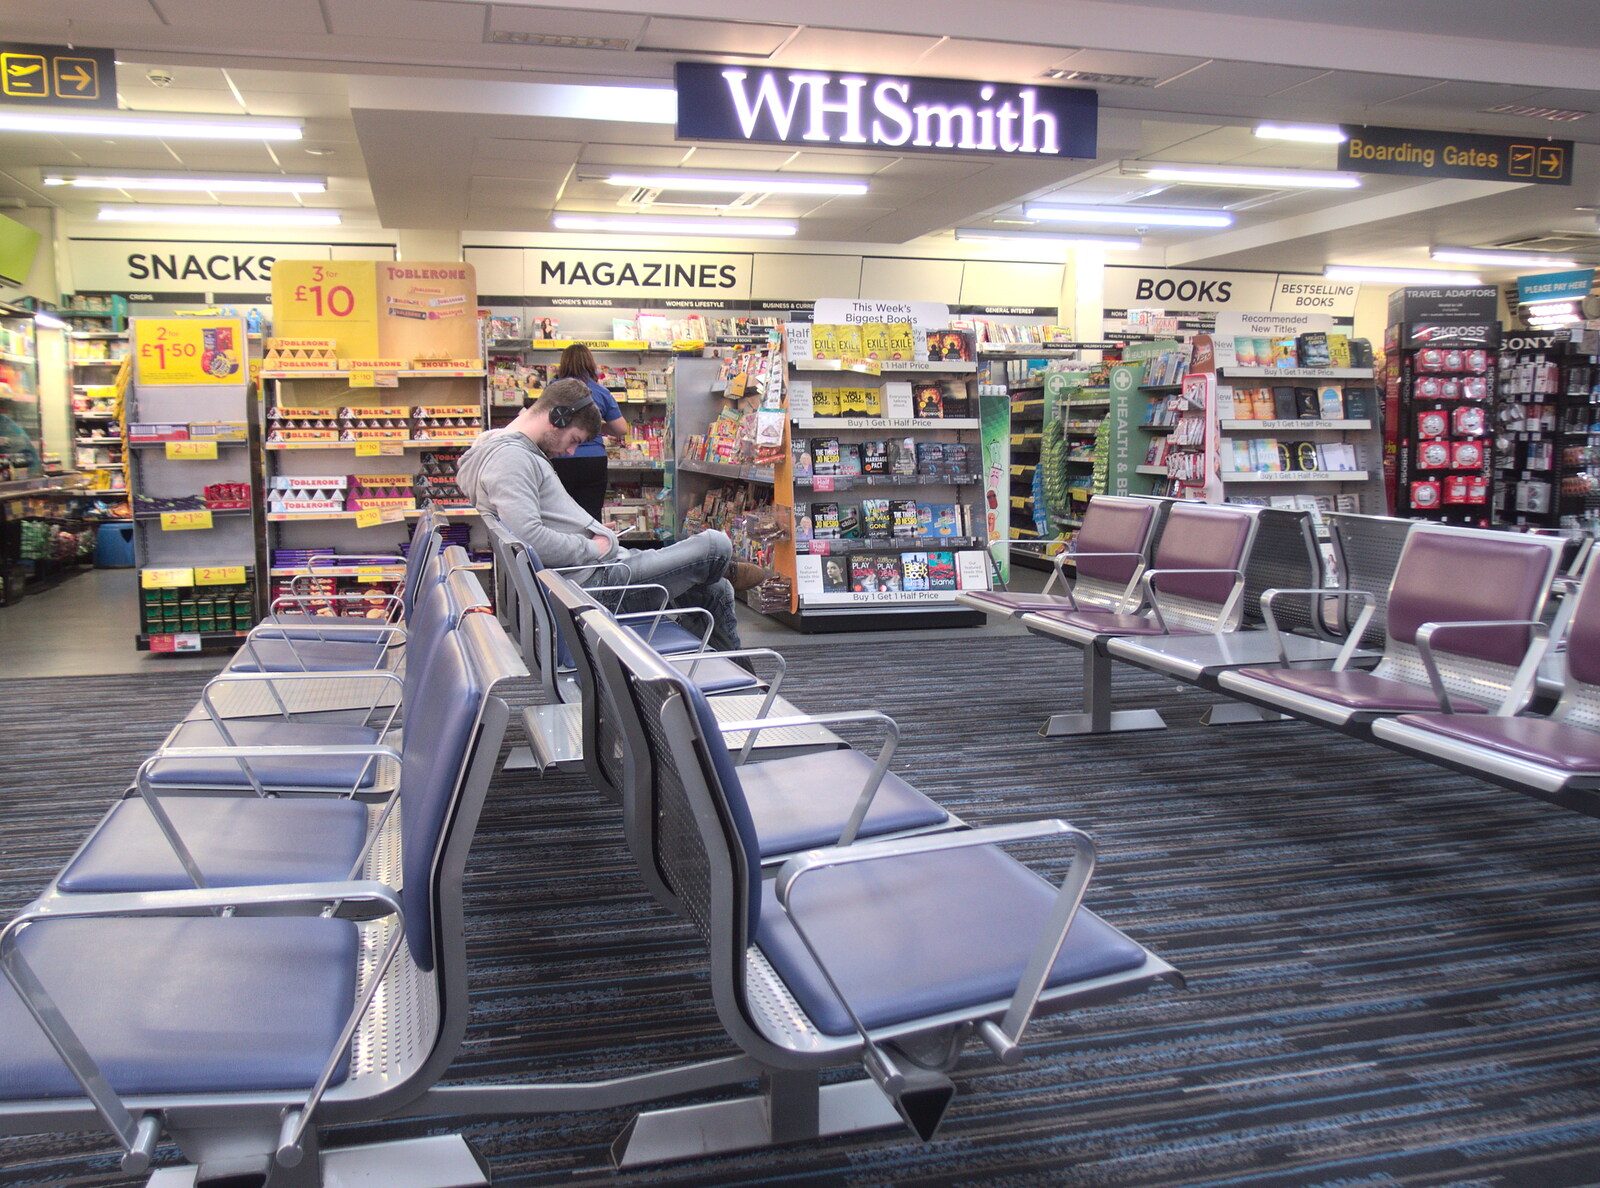 The WHSmith outlet in Exeter's departure lounge from New Year's Eve in Spreyton, Devon - 31st December 2017